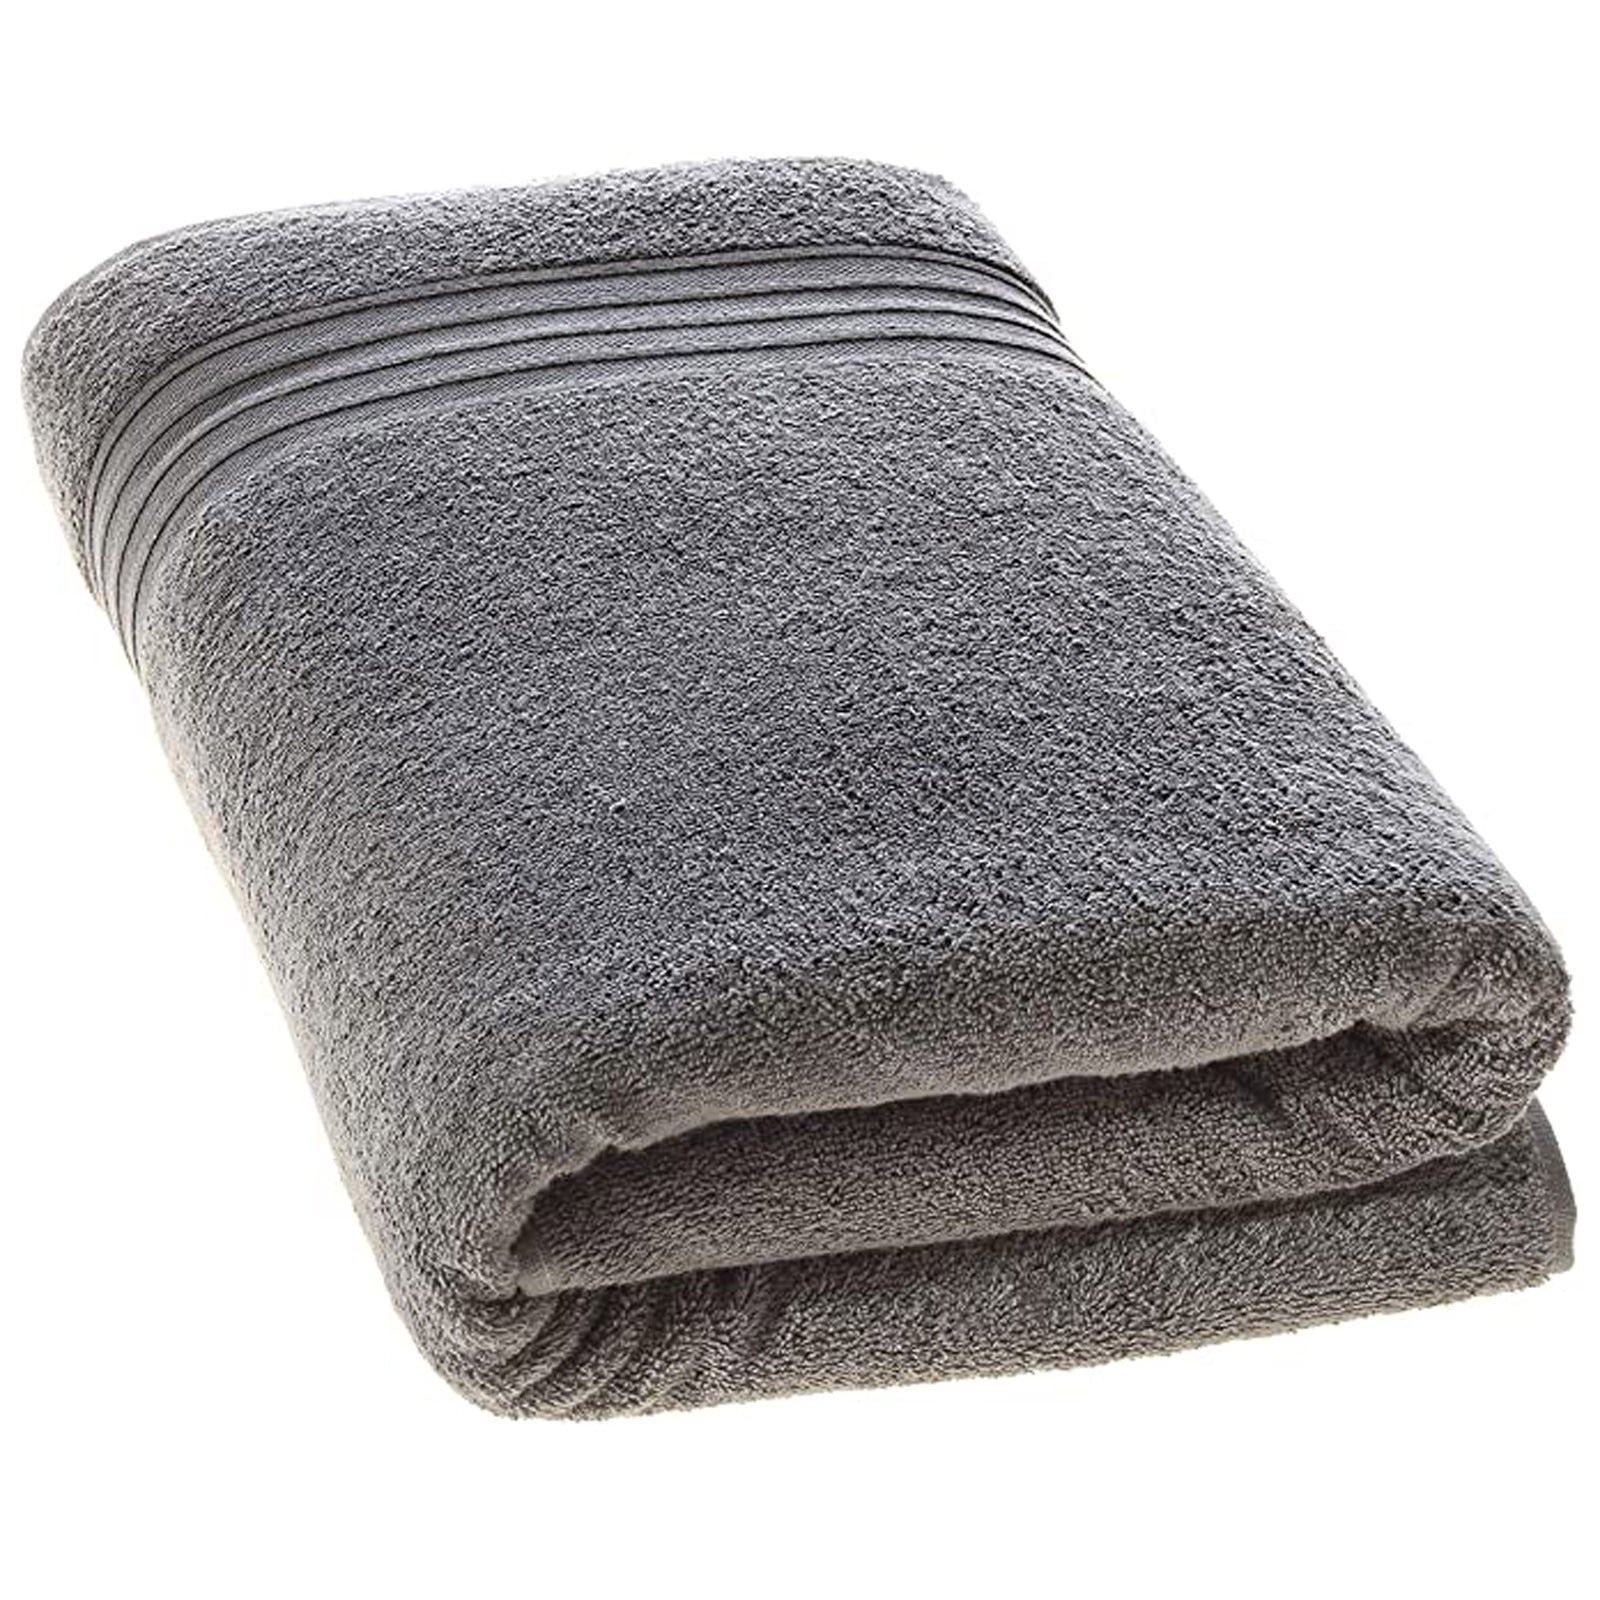 Close Up Photo of Large Bath Towels and Small Face Towels …